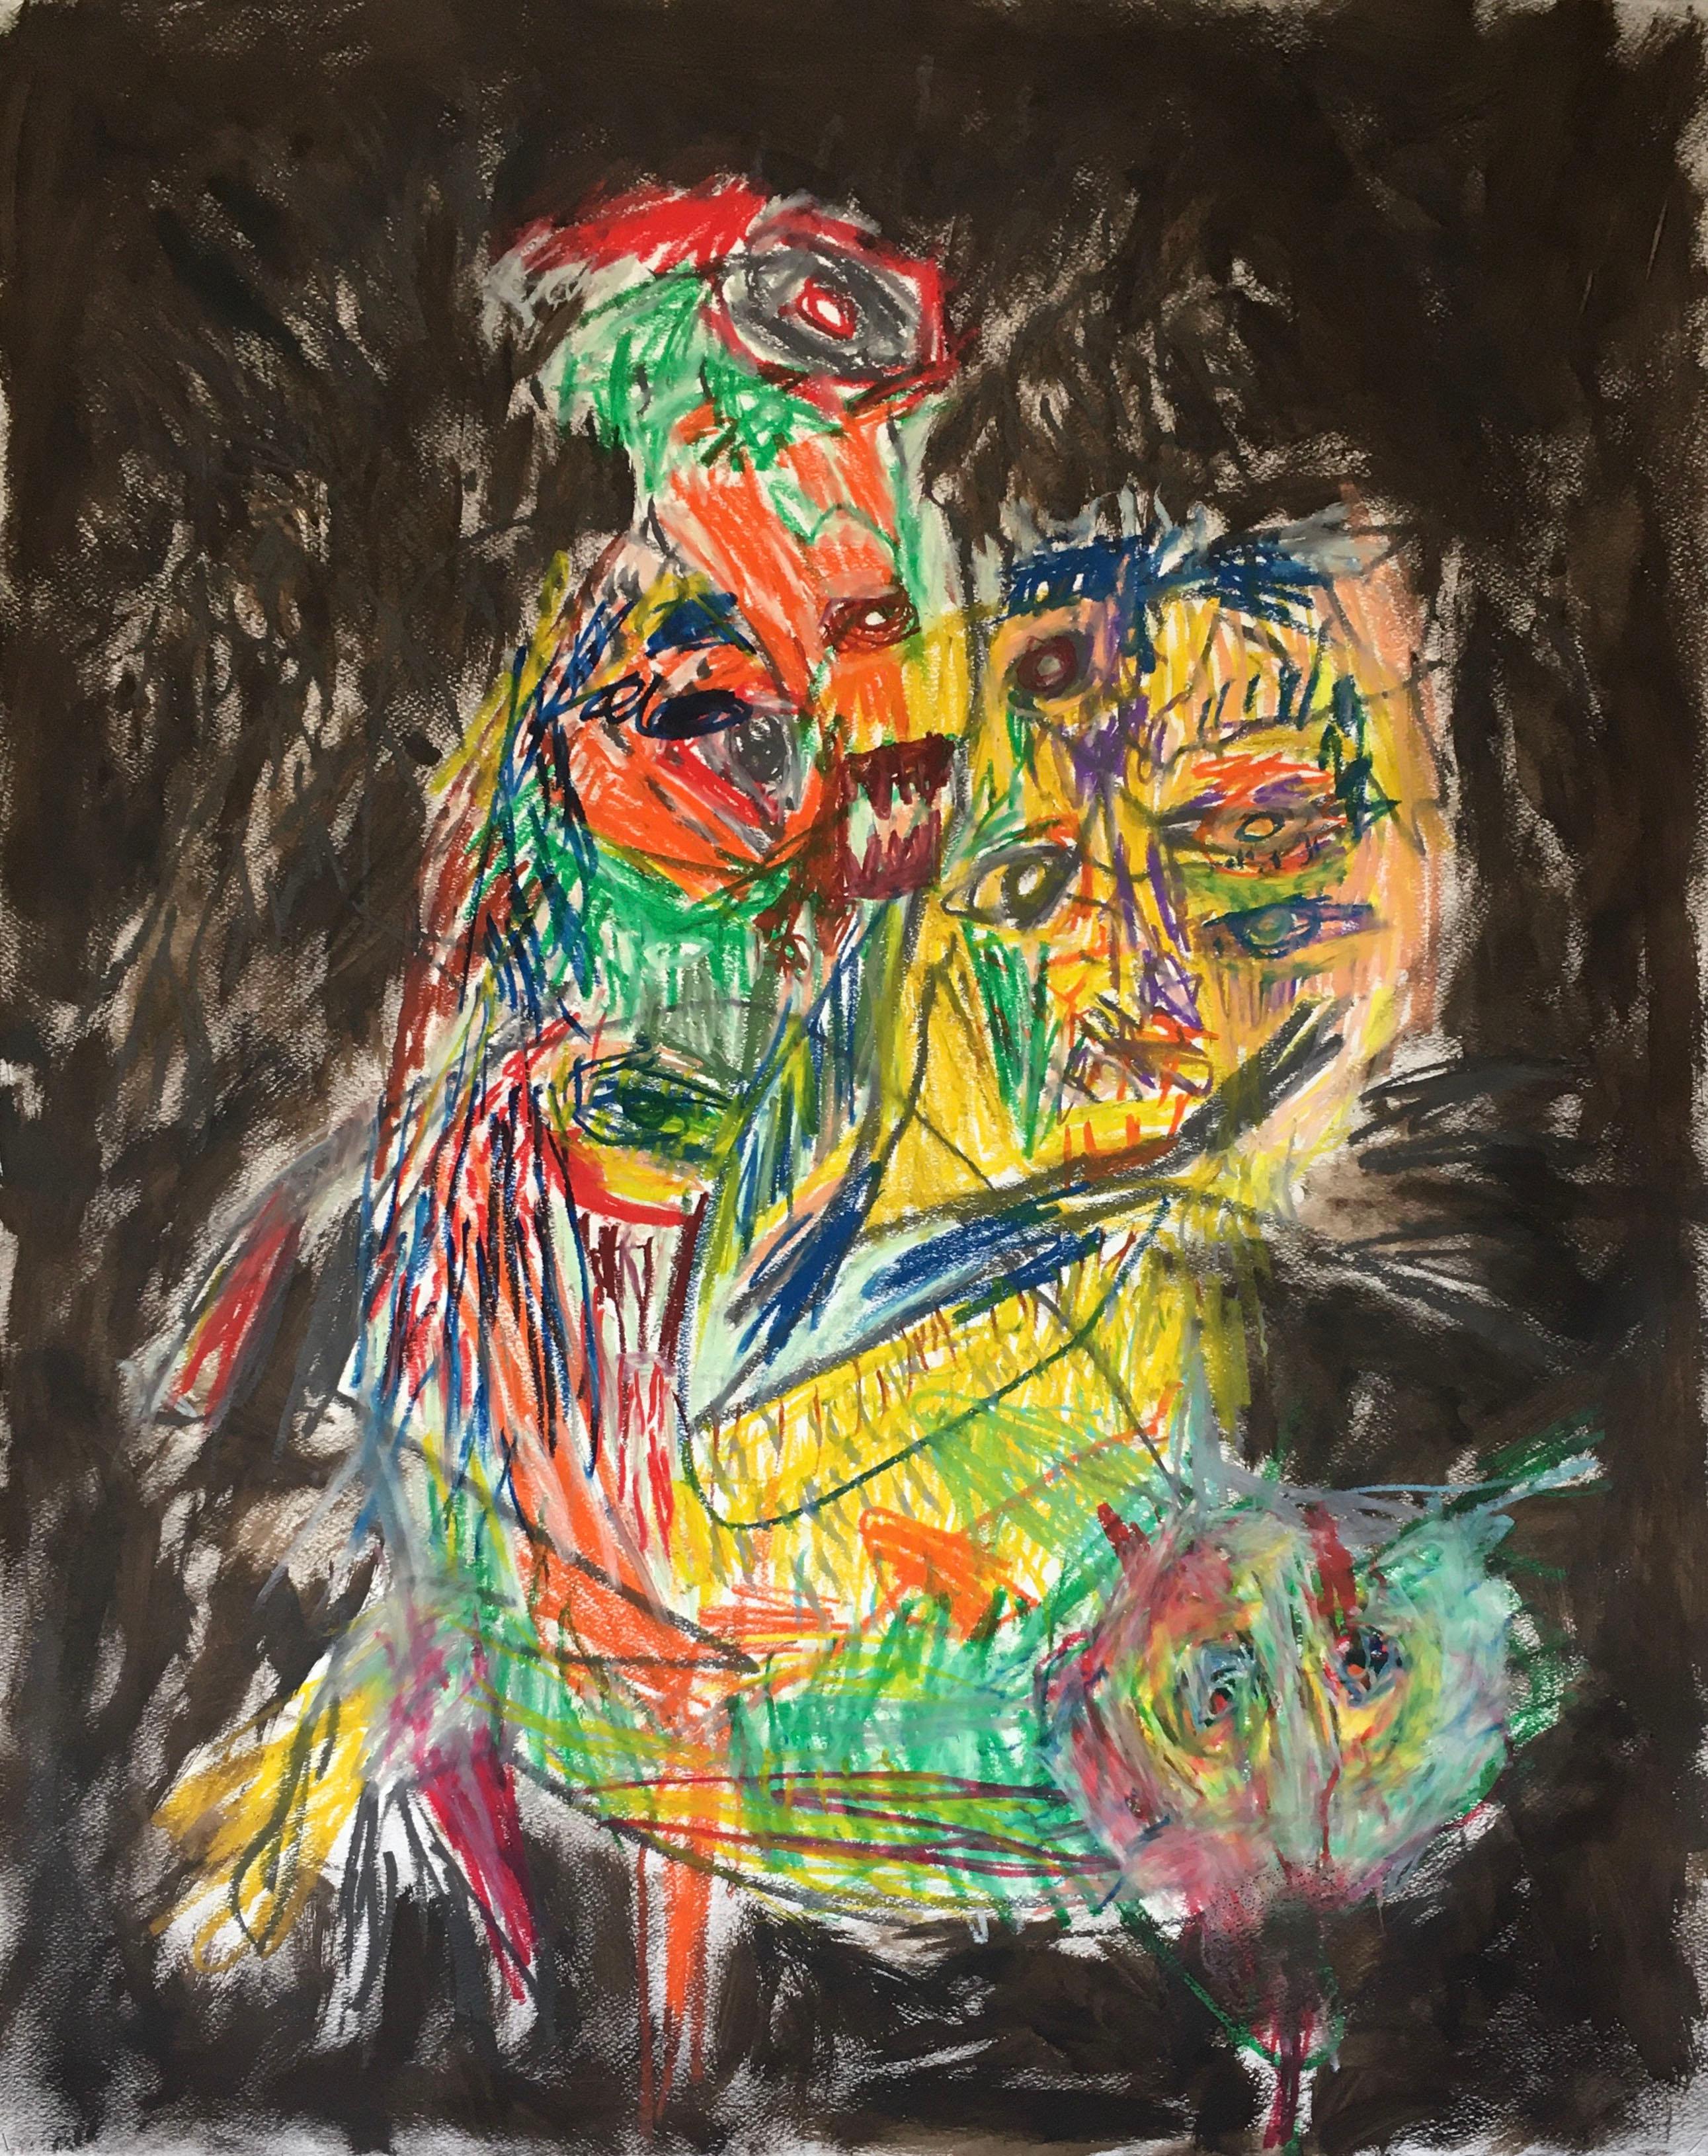 Survival colour - Julien Wolf, 21st Century, Contemporary Expressionist Drawing